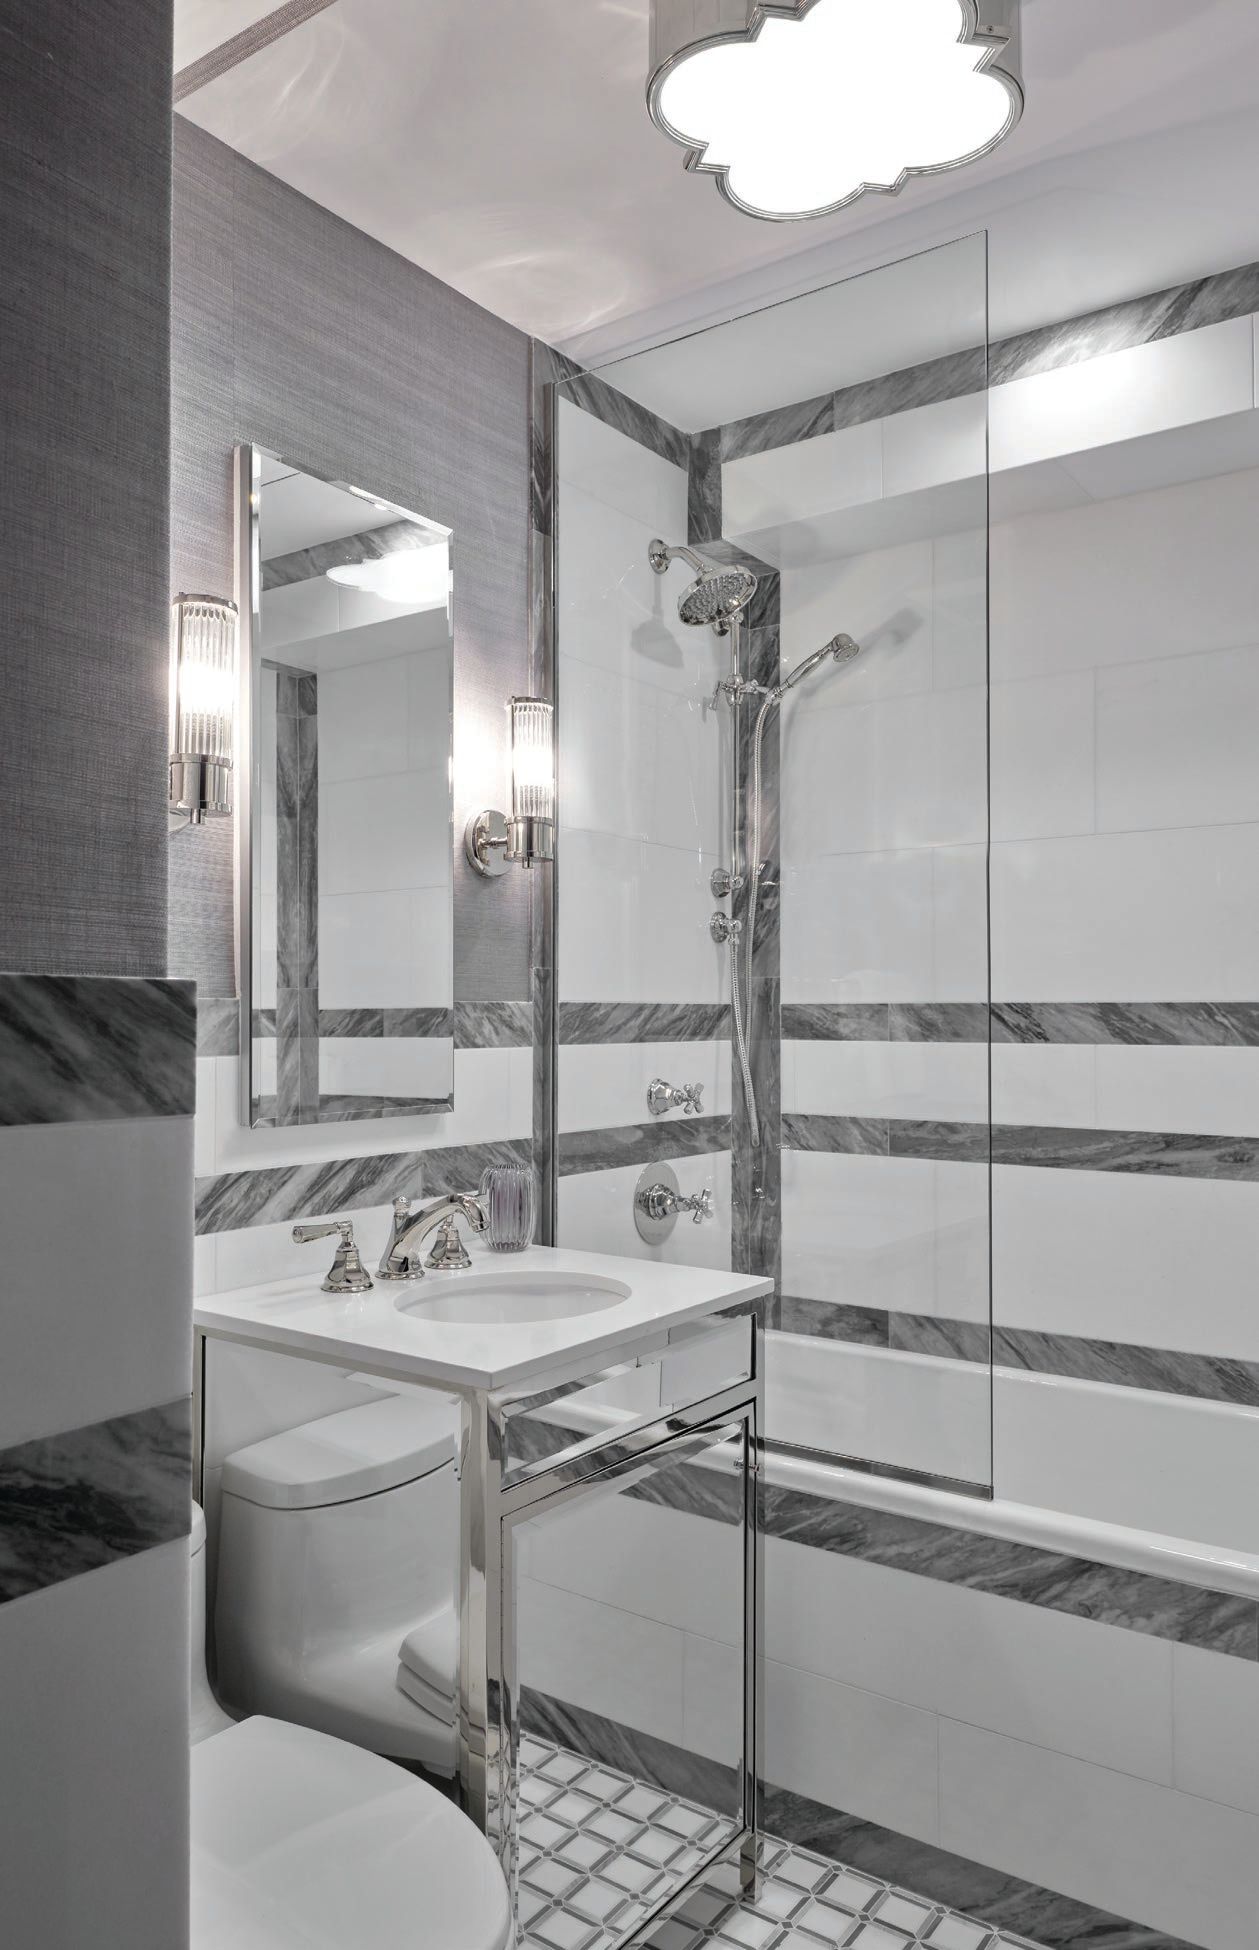 A mirrored sink adds glam to the bathroom. PHOTOGRAPHED BY REID ROLLS